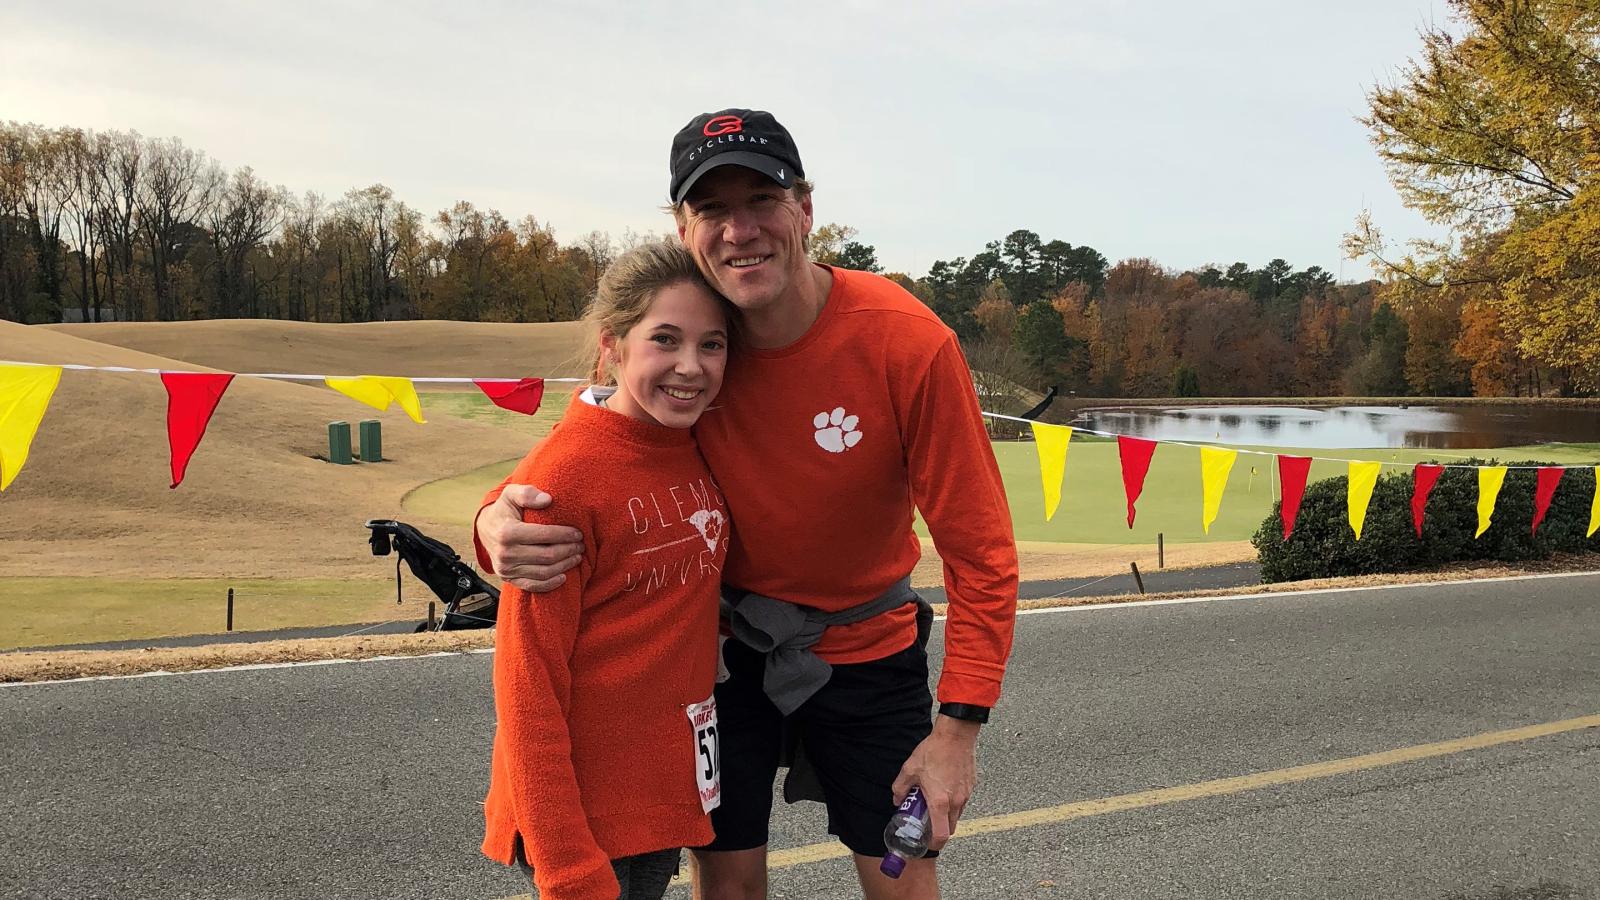 After finally receive the right diagnosis and treatment for Lyme disease, Craig Suro and his daughter are back to enjoying healthy, full lives. Running is one of their favorite activities, and here they celebrate completing a local turkey trot race together last Thanksgiving. Photo courtesy of the Suro family